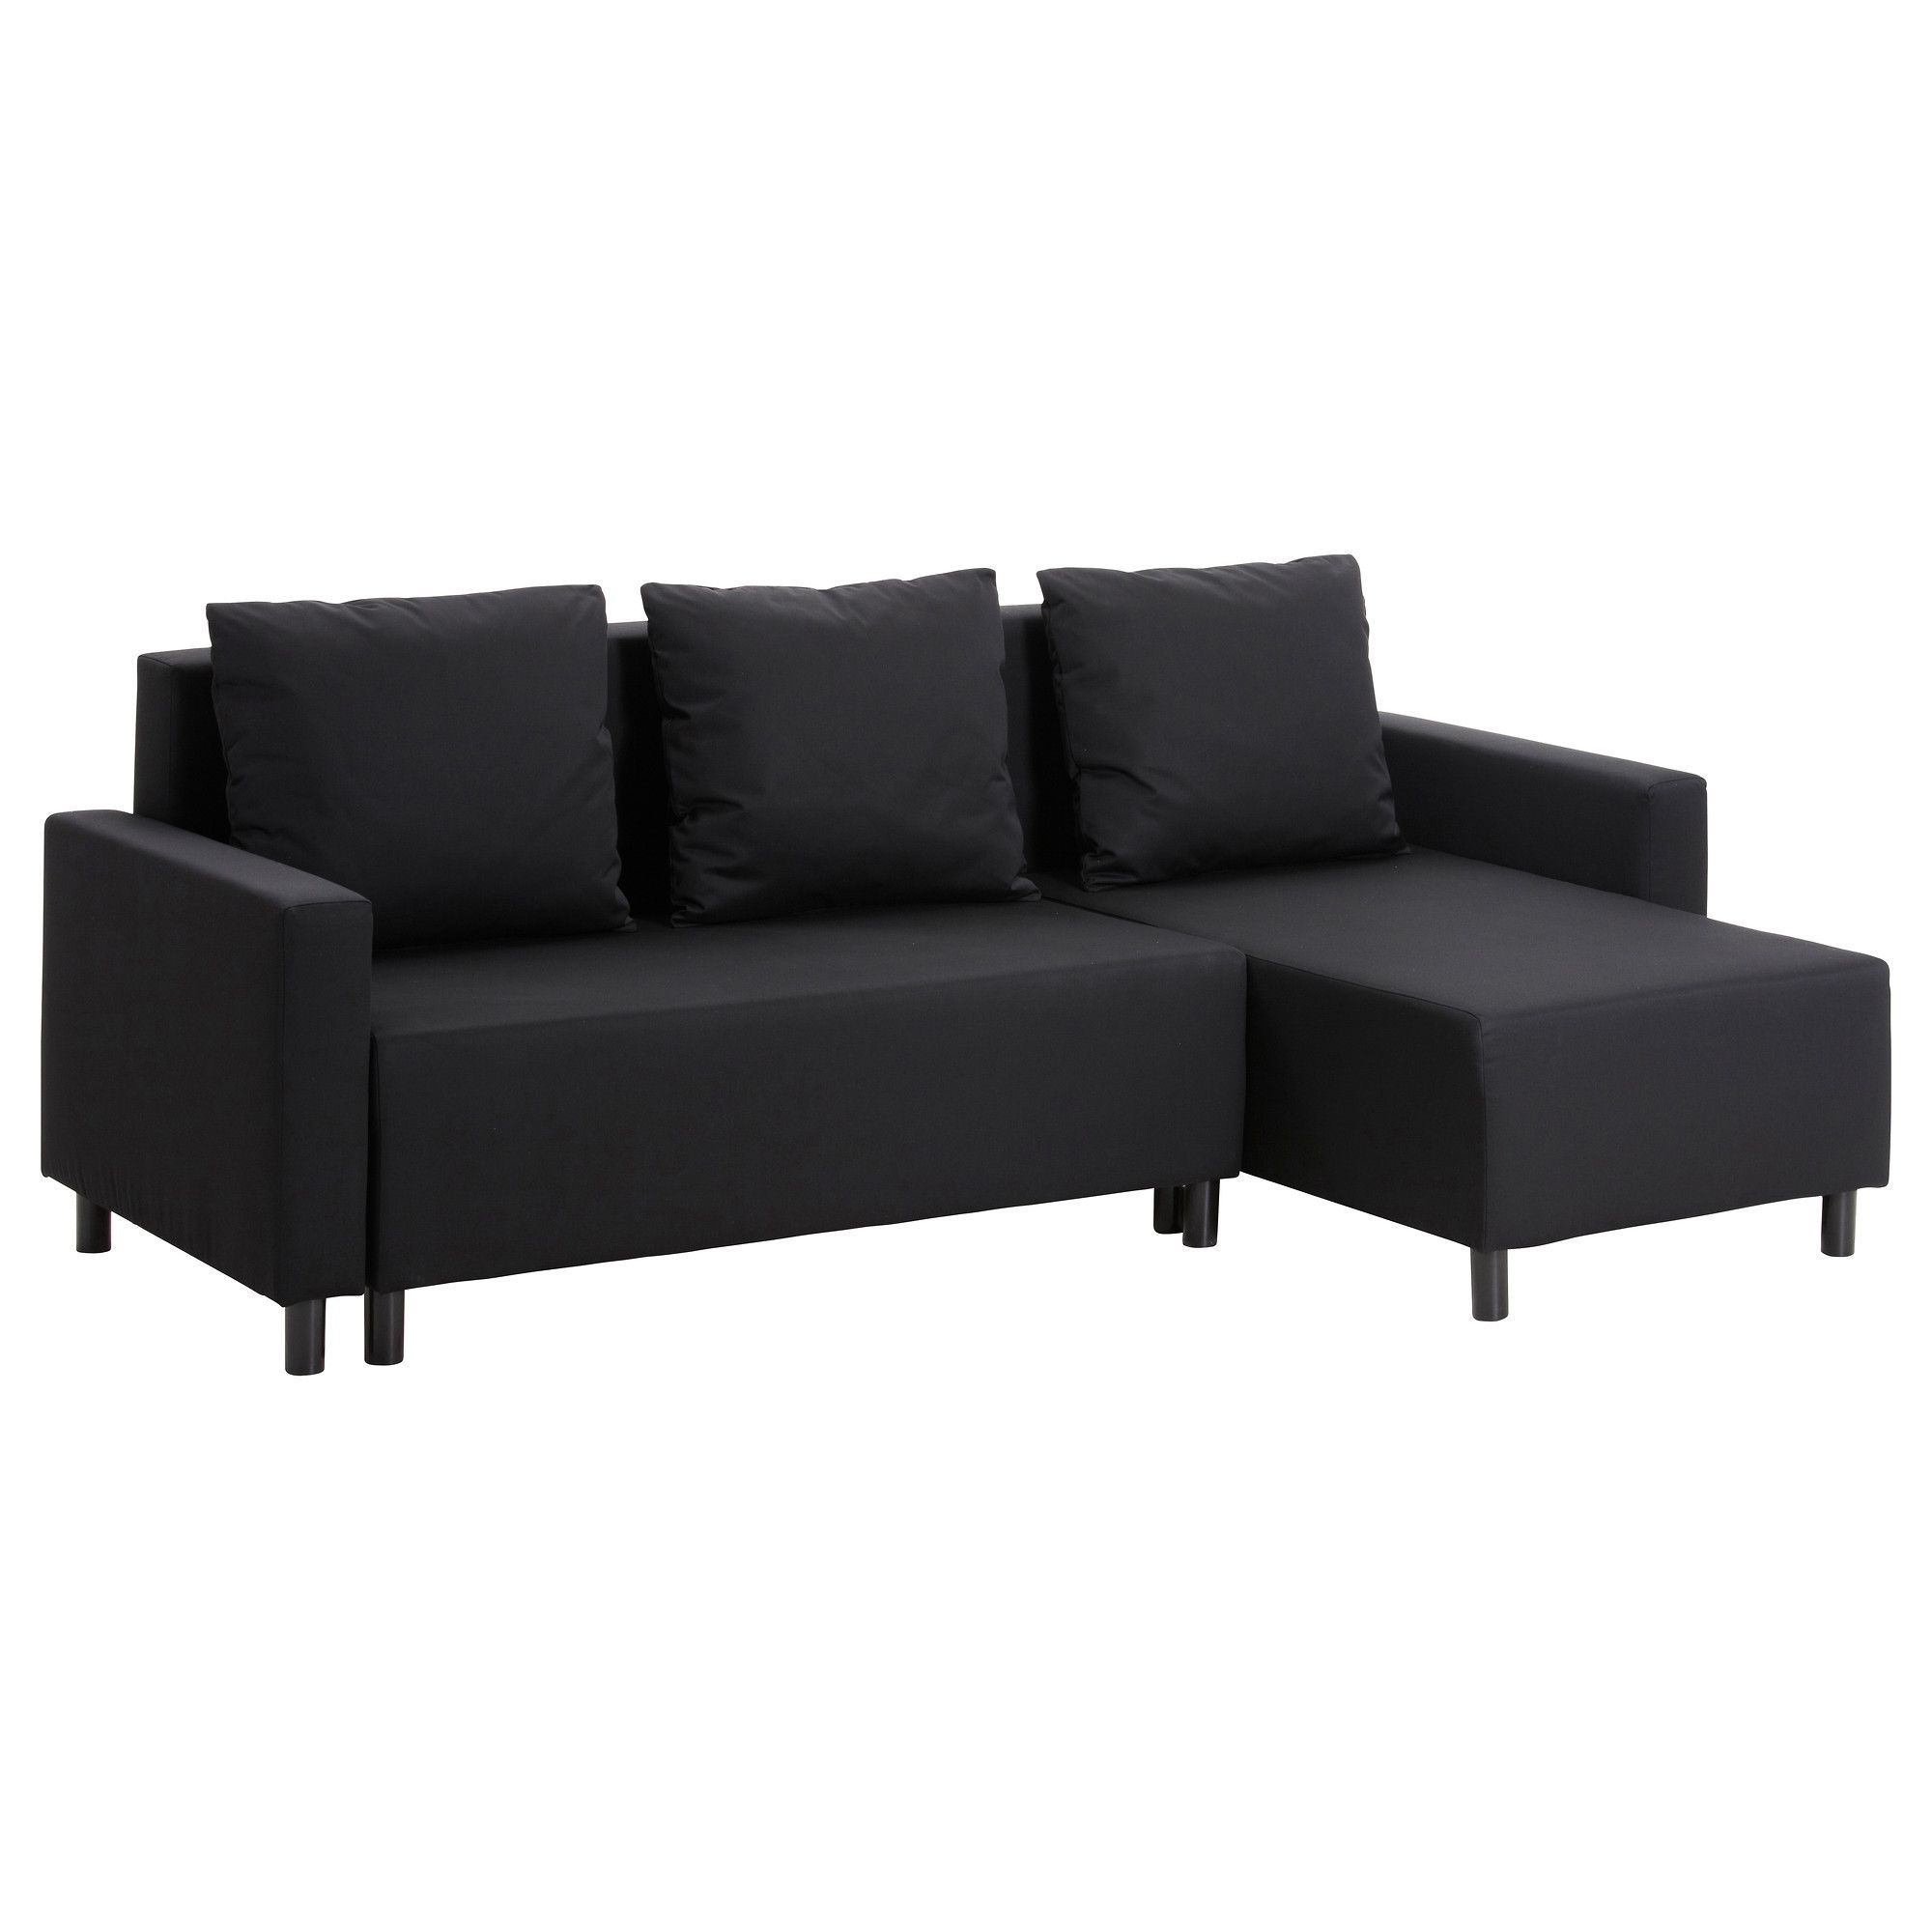 Current Lugnvik Sofa Bed With Chaise Lounge – Granån Black – Ikea Regarding Ikea Sofa Beds With Chaise (View 12 of 15)